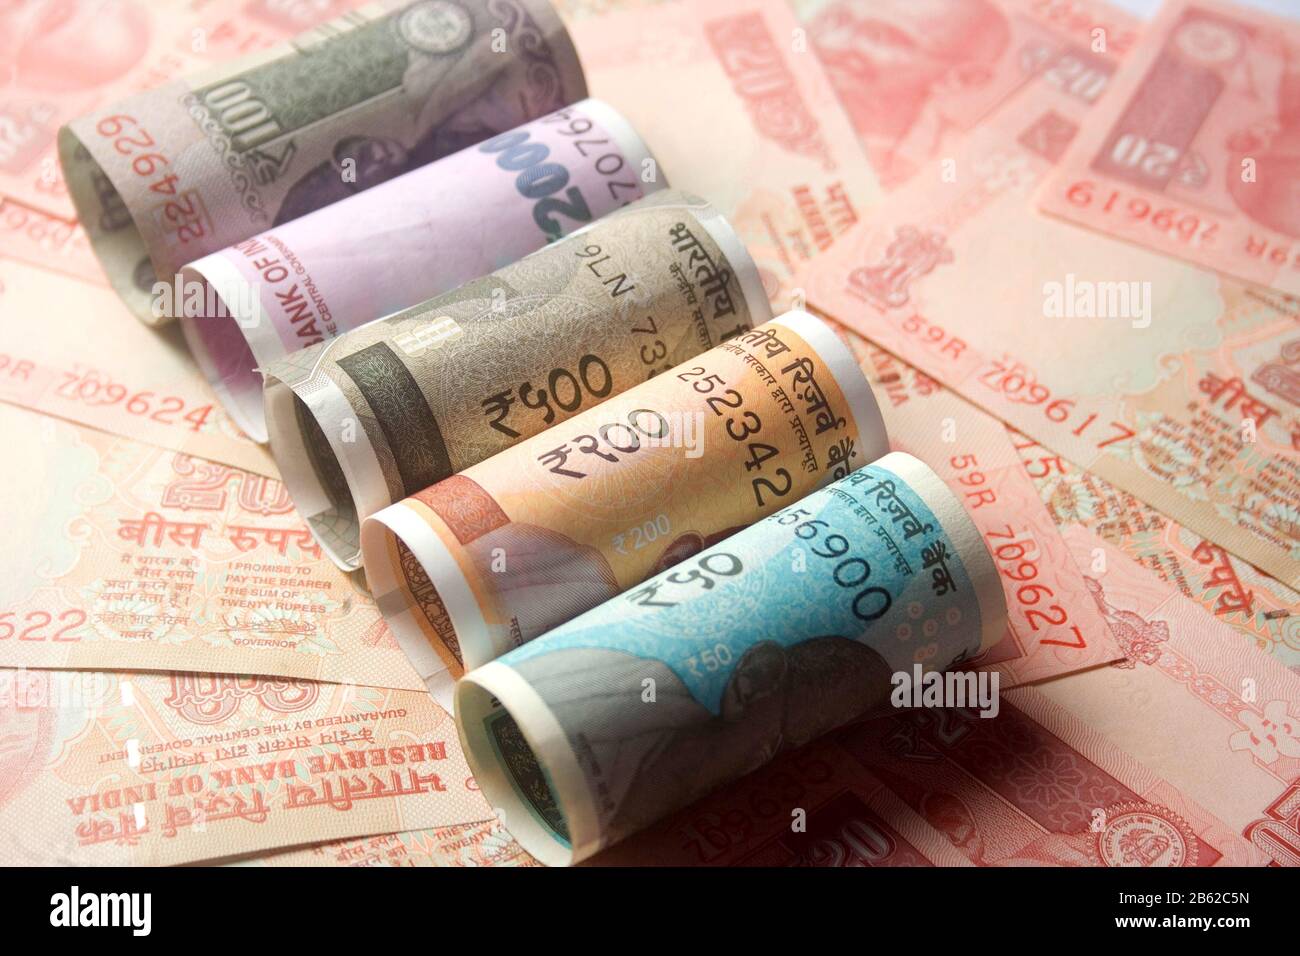 Indian new 200 and 500 .2000.50.100.20.Rs Currency Note.rolling and band rupees Stock Photo